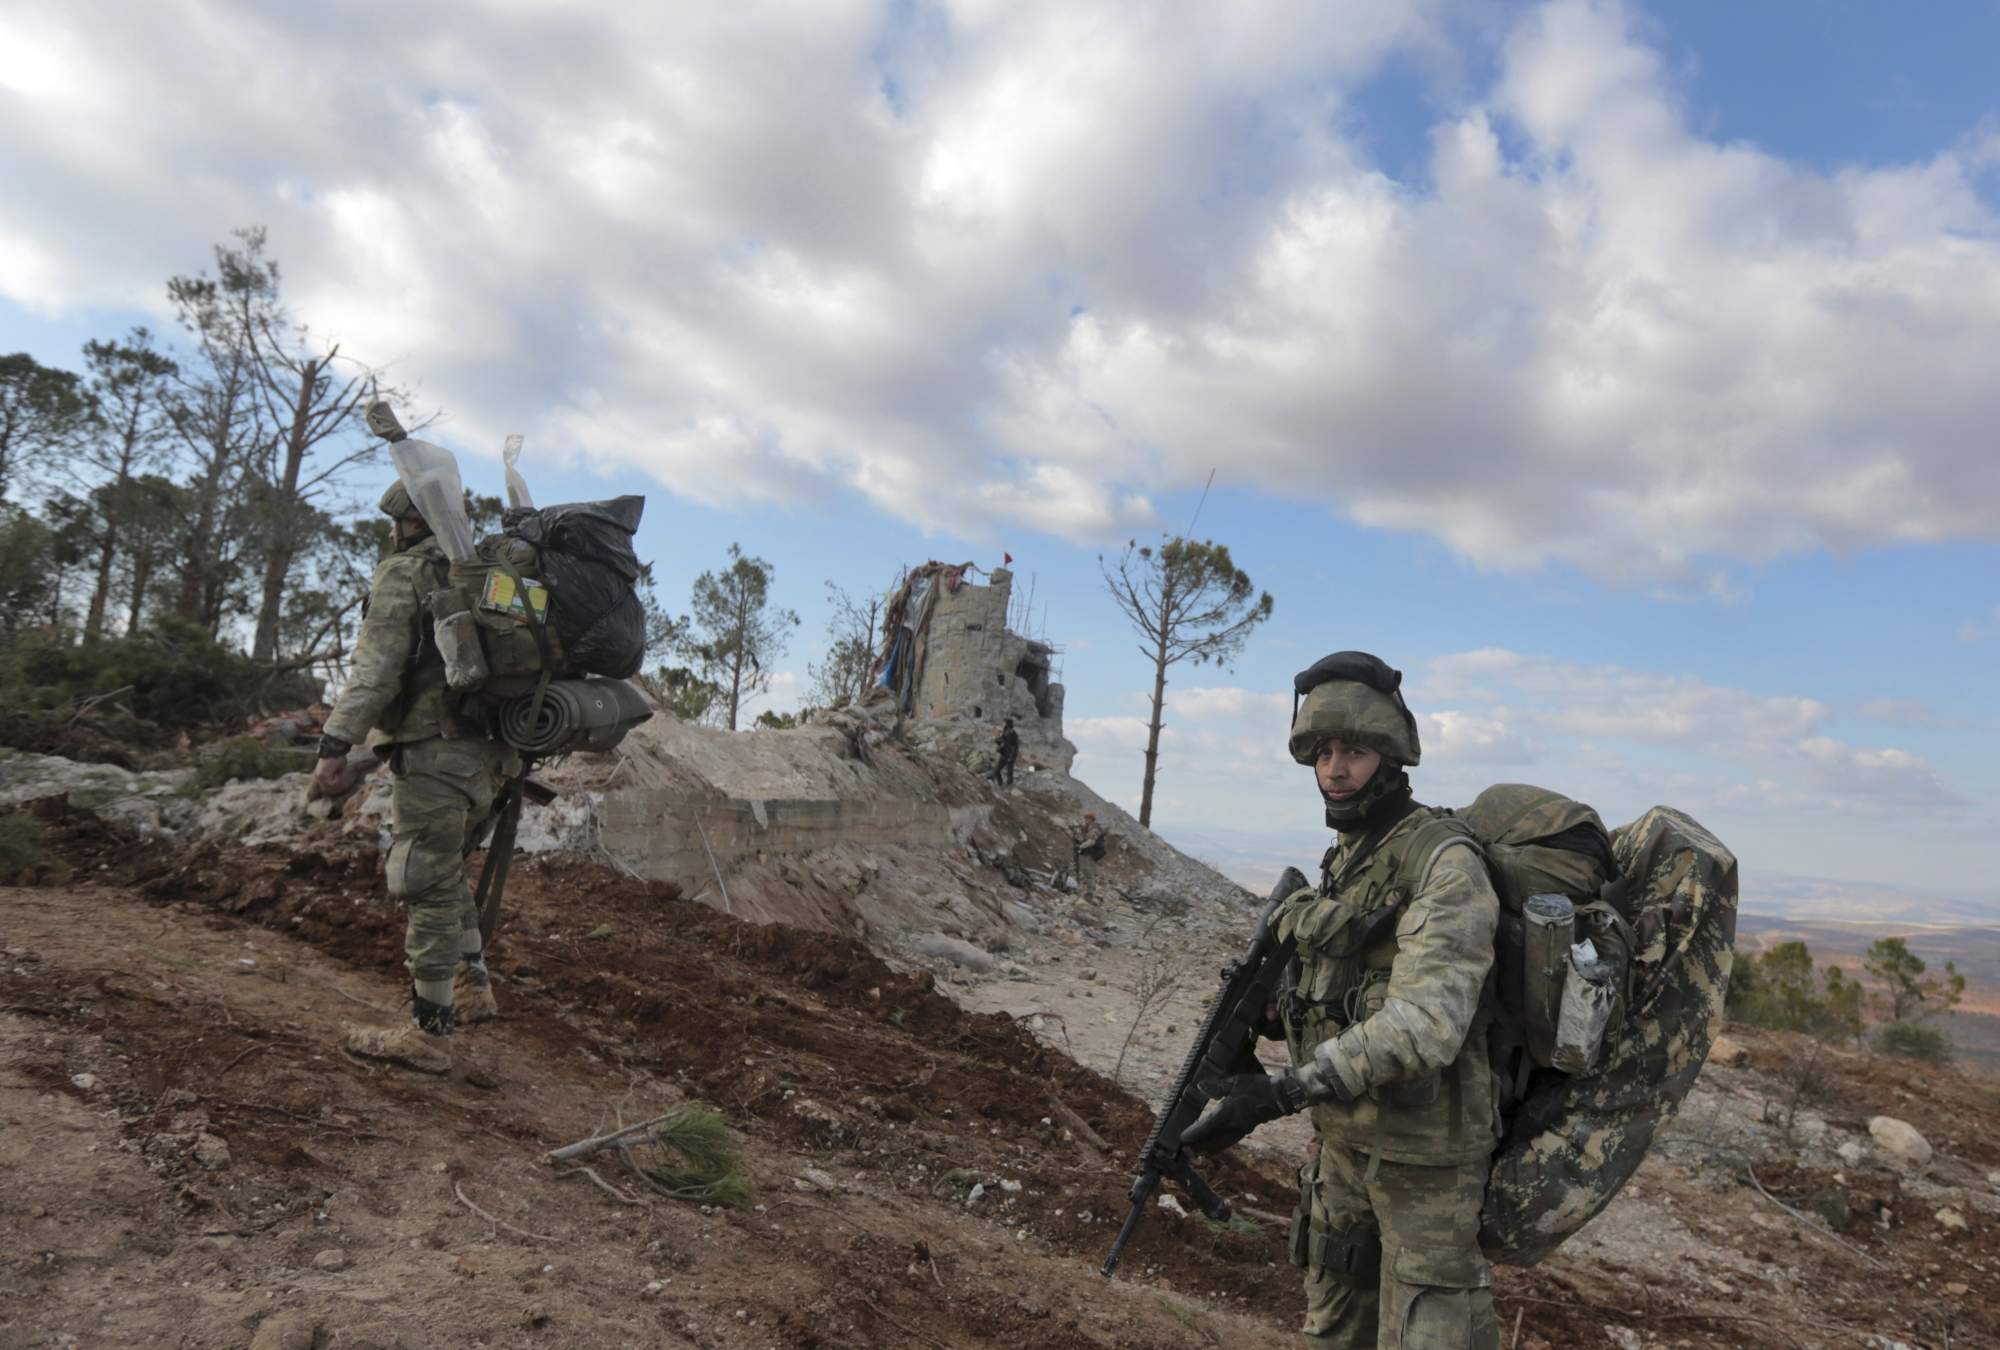 Turkish troops secure the Bursayah hill, which separates the Kurdish-held enclave of Afrin from the Turkey-controlled town of Azaz, Syria, Sunday, Jan. 28, 2018. Turkish troops and allied Syrian fighters captured the strategic hill in northwestern Syria after intense fighting on Sunday as their offensive to root out Kurdish fighters enters its second week, Turkey's military and Syrian war monitor reported. (AP Photo) Syria